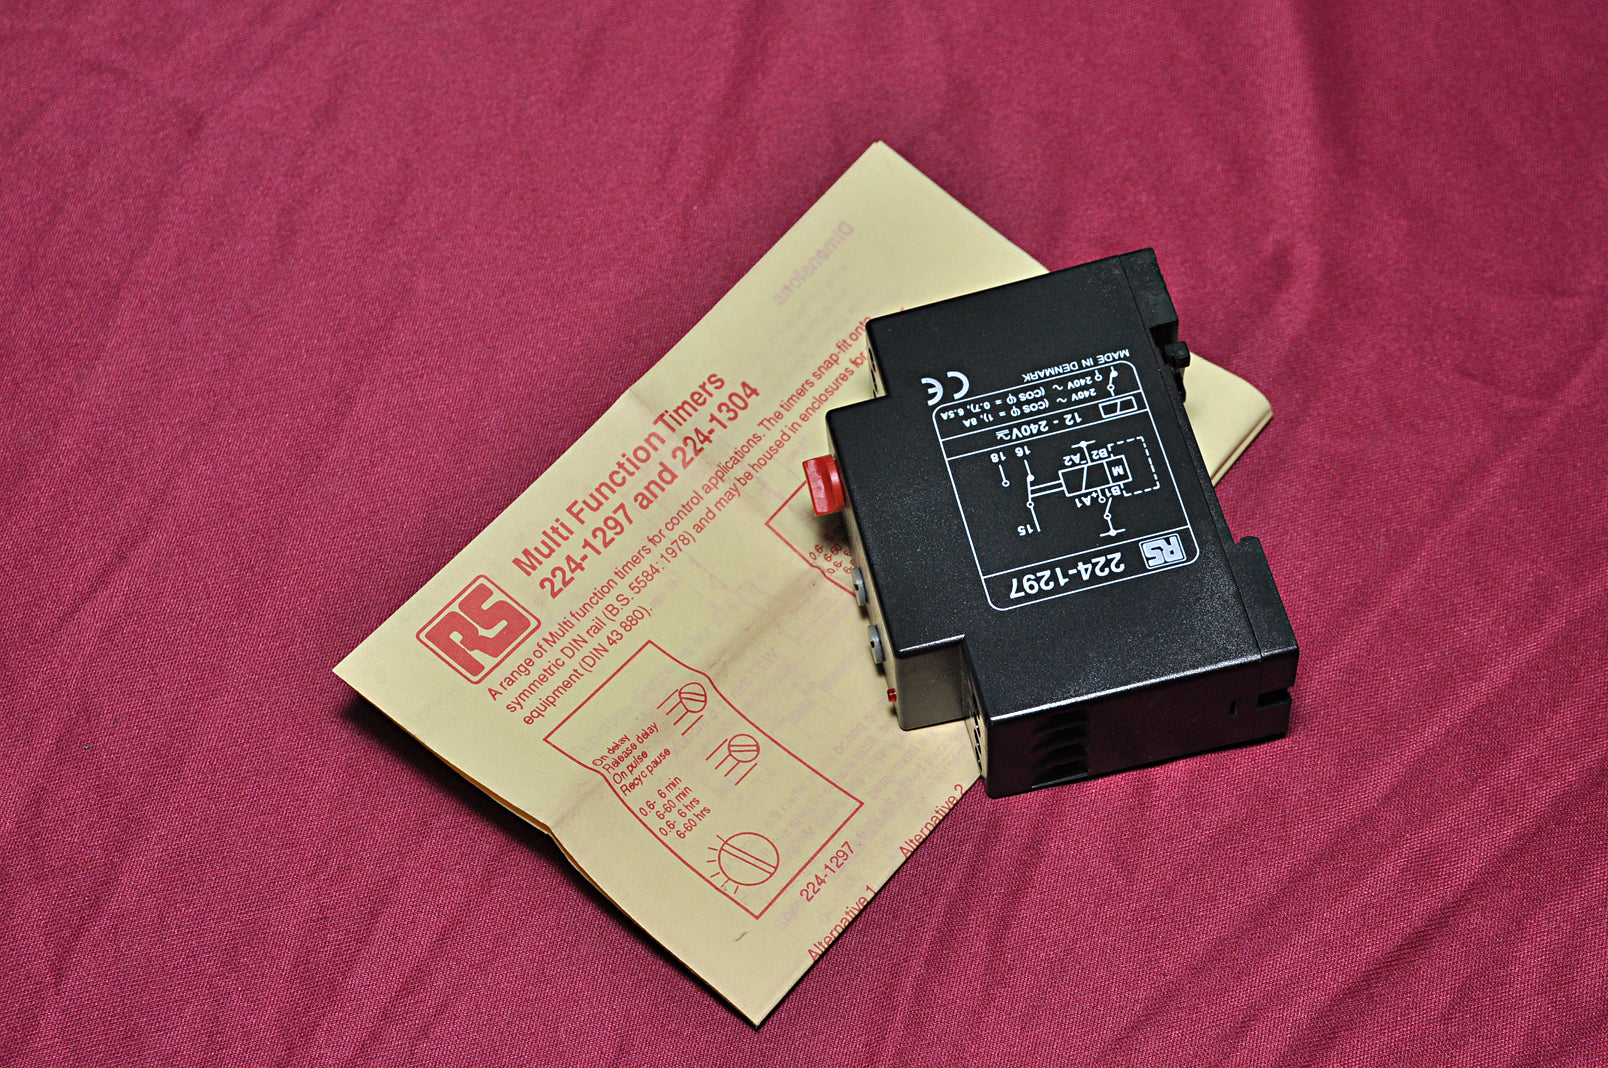 Rs components 224-1297 multifunction timer relay